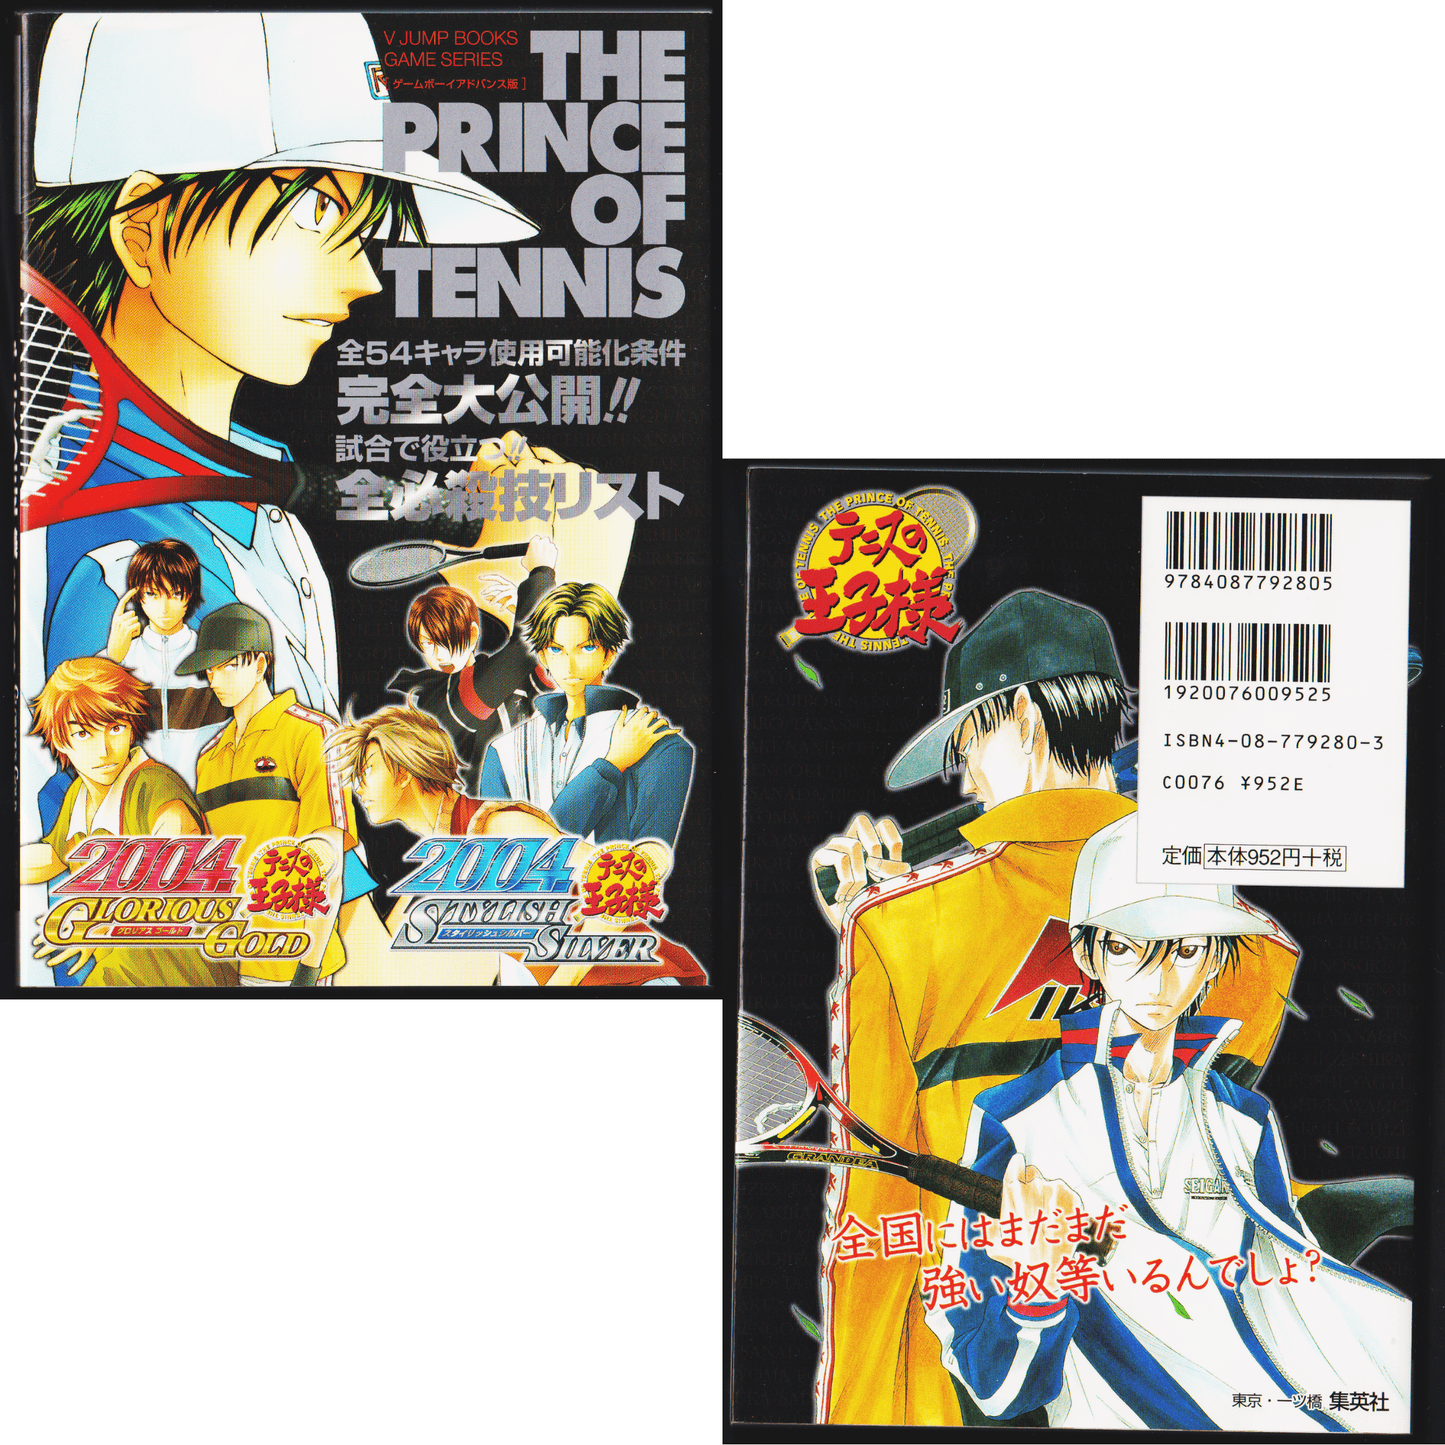 VJump Books The Prince of Tennis 2004 - Glorious Gold Stylish Silver